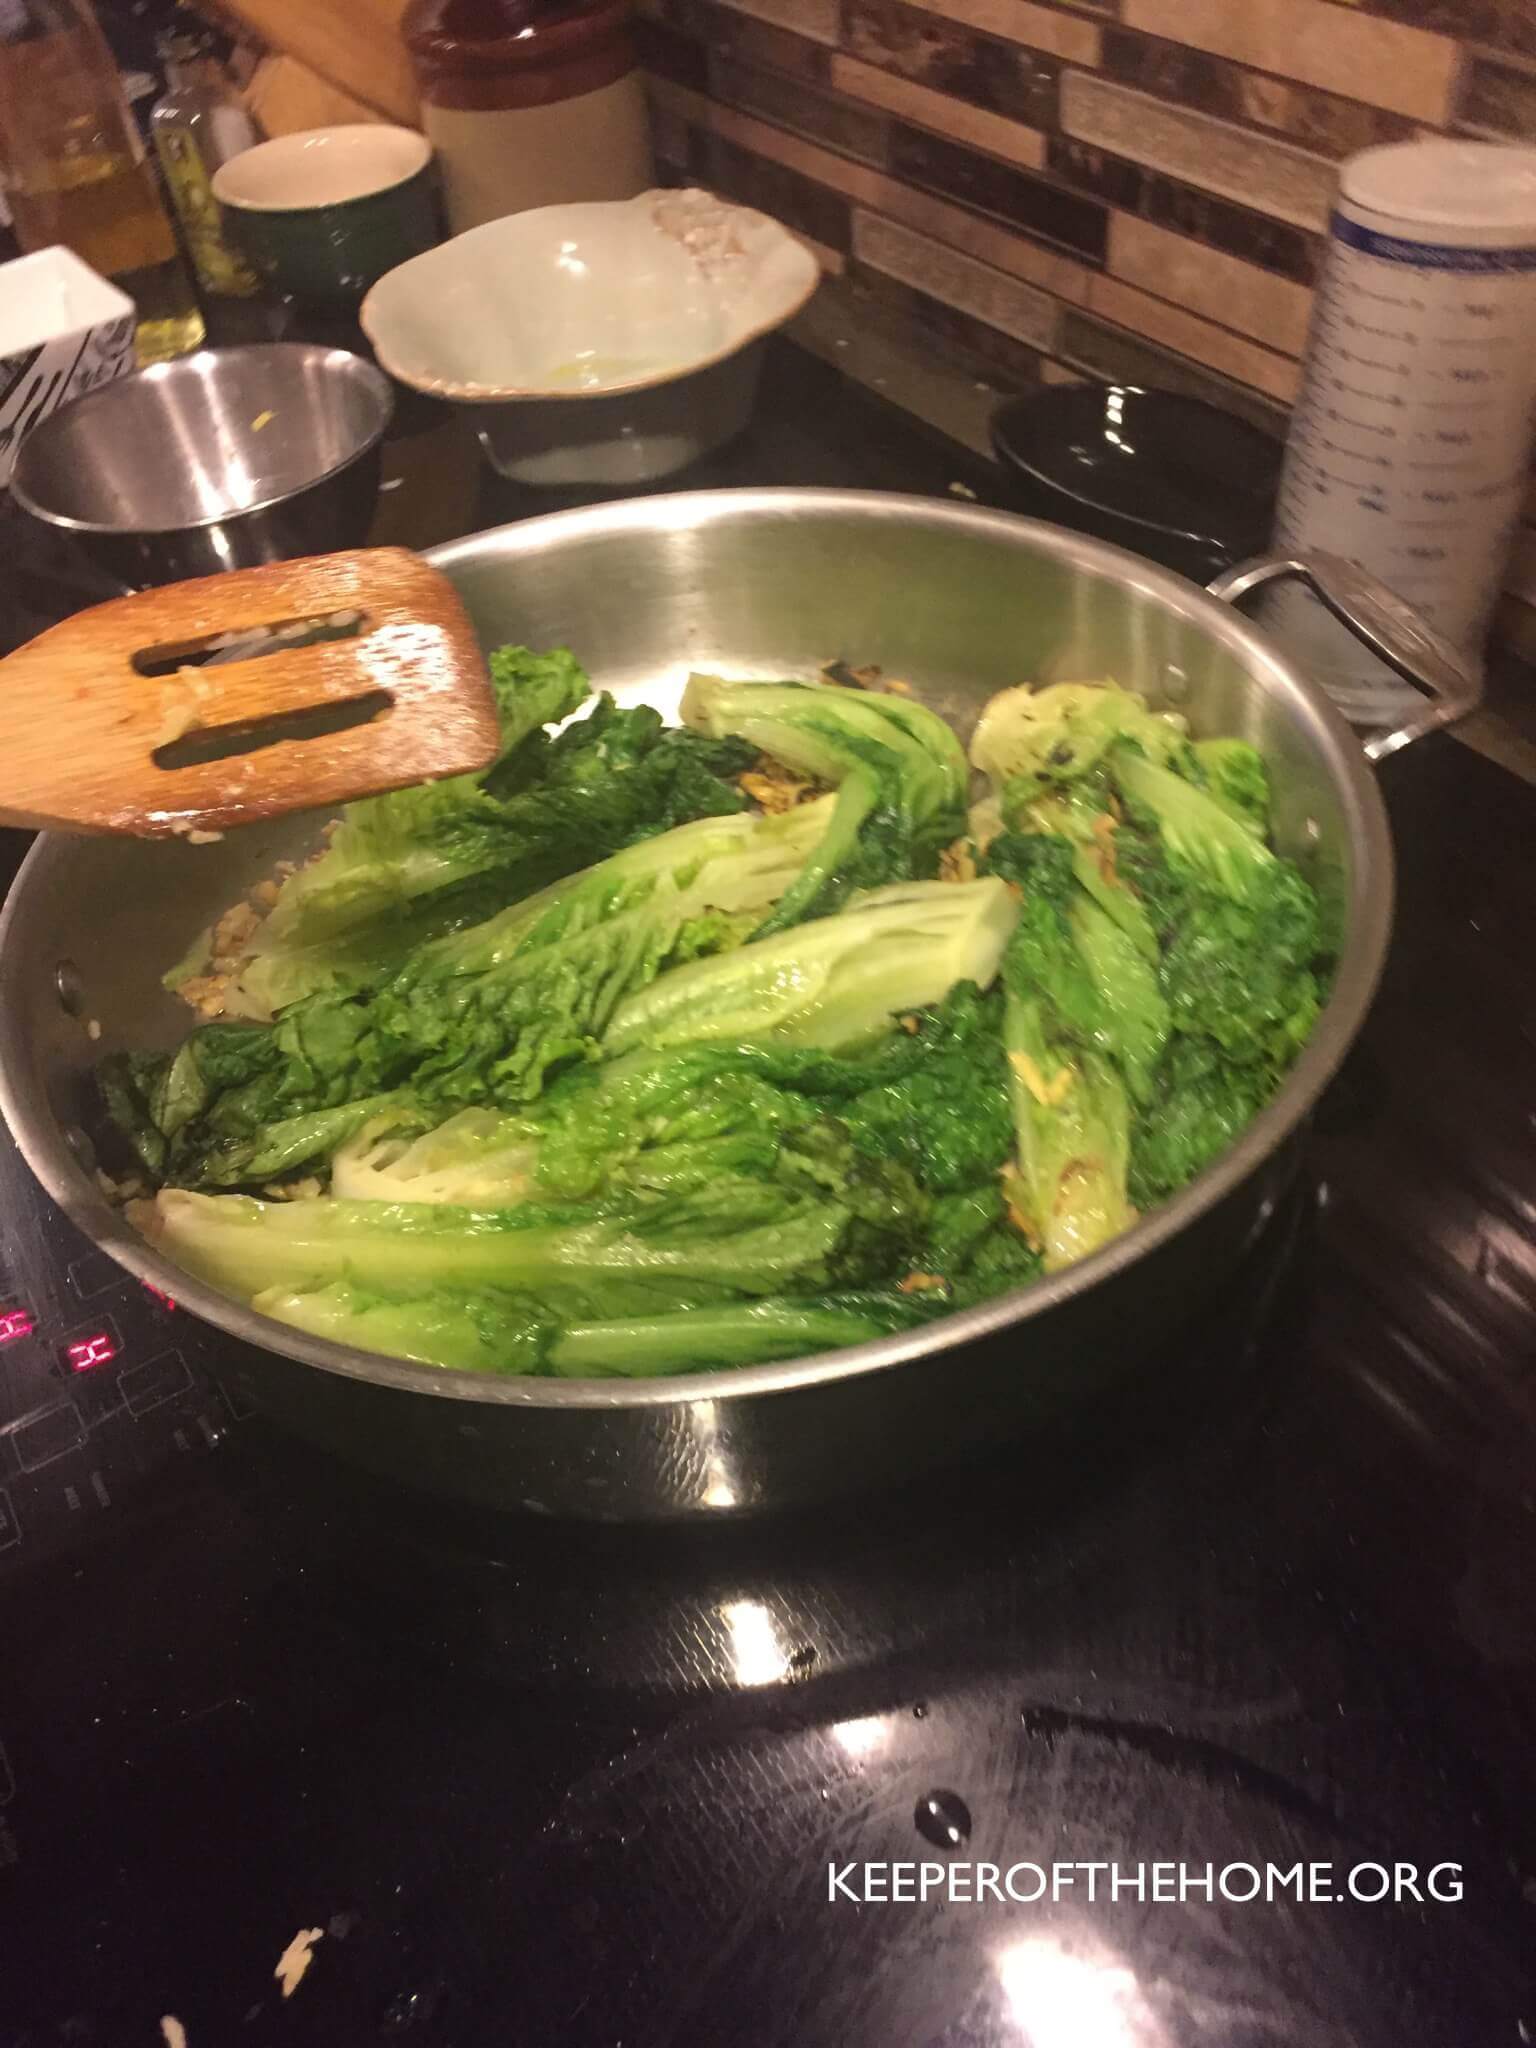 After testing it out for myself, EVERYONE should know how to stir-fry lettuce! Not only is it easy-peasy, but it's delicious (even the kids devoured it!).